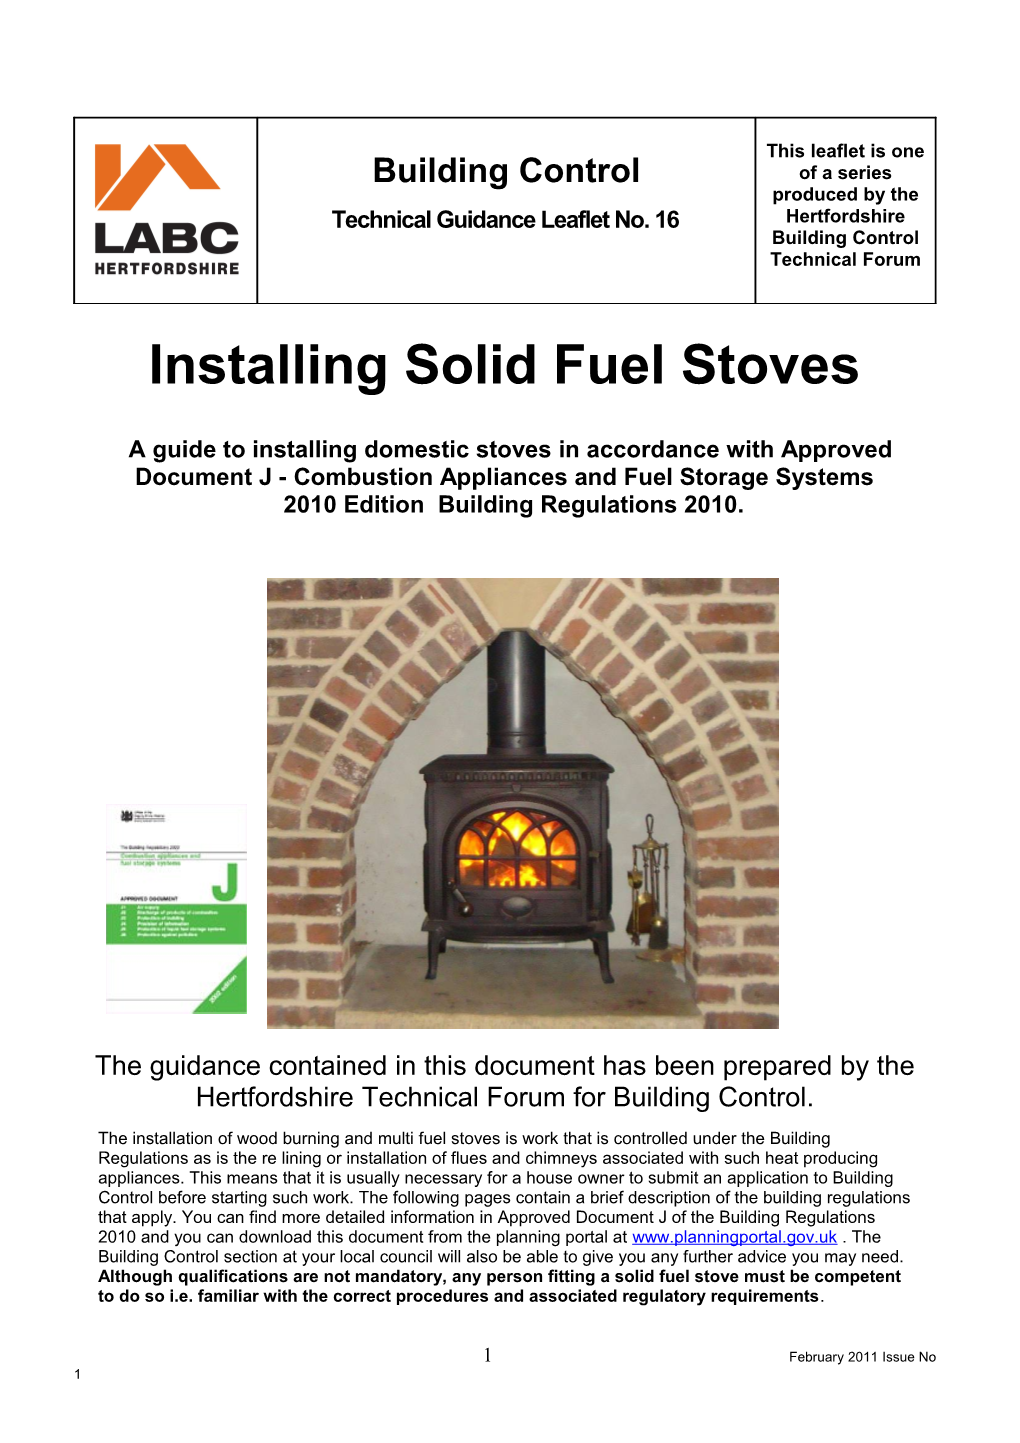 Installing Solid Fuel Stoves